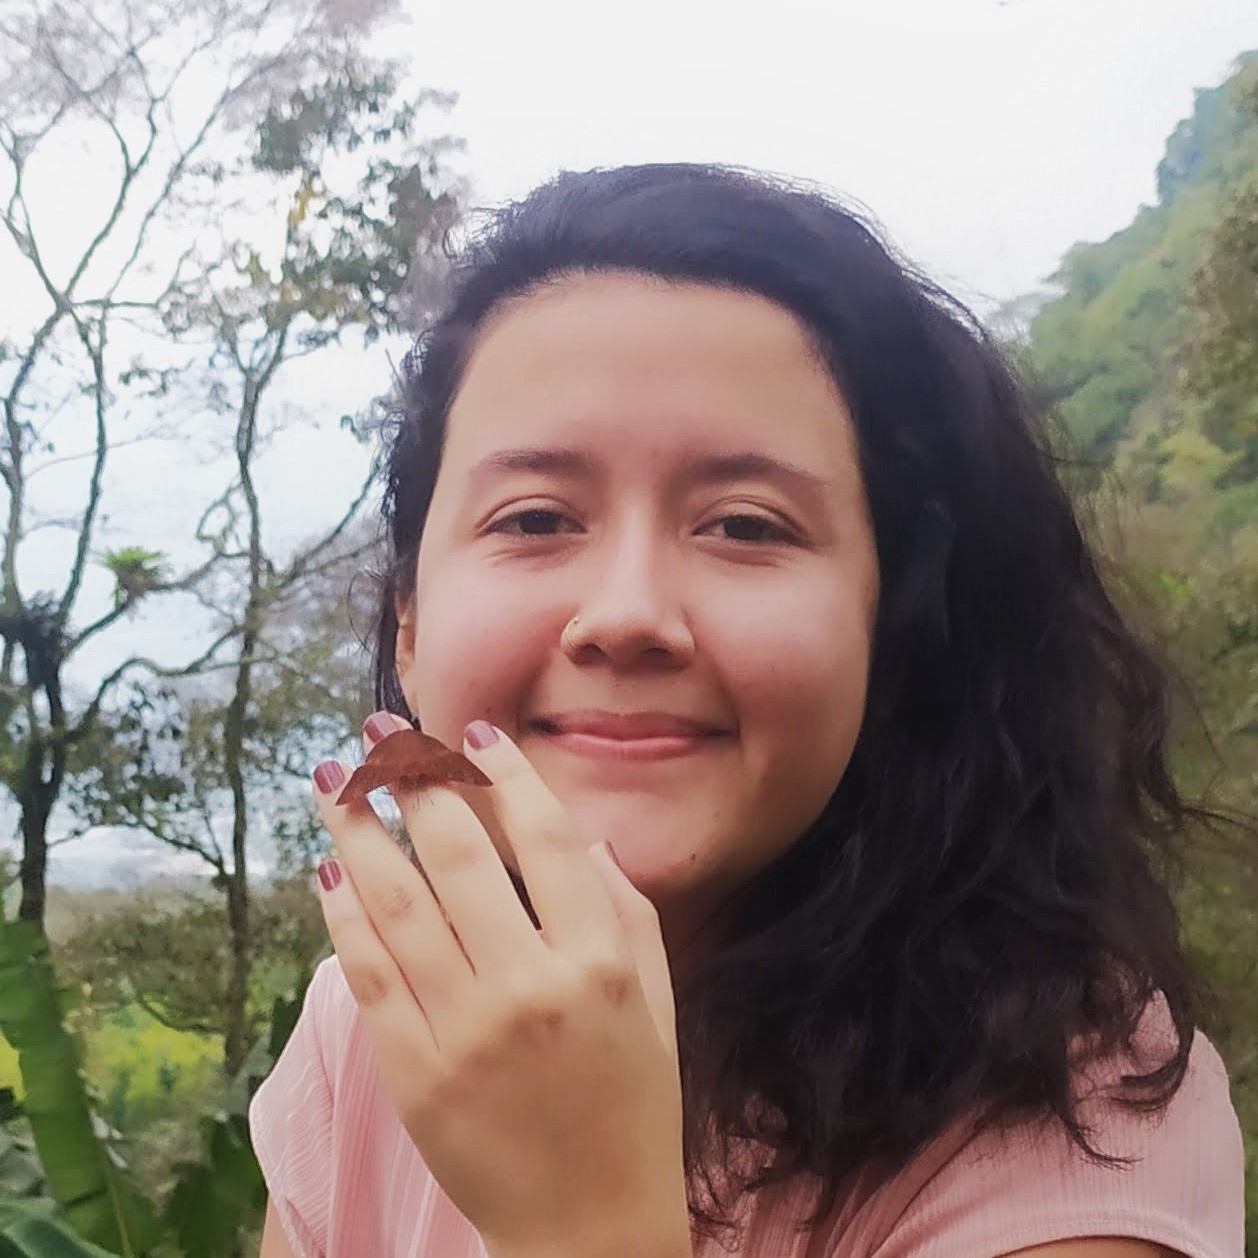 Laura Sierra-Botero in foggy mountains holding a brown moth up to her face and smiling at the camera.